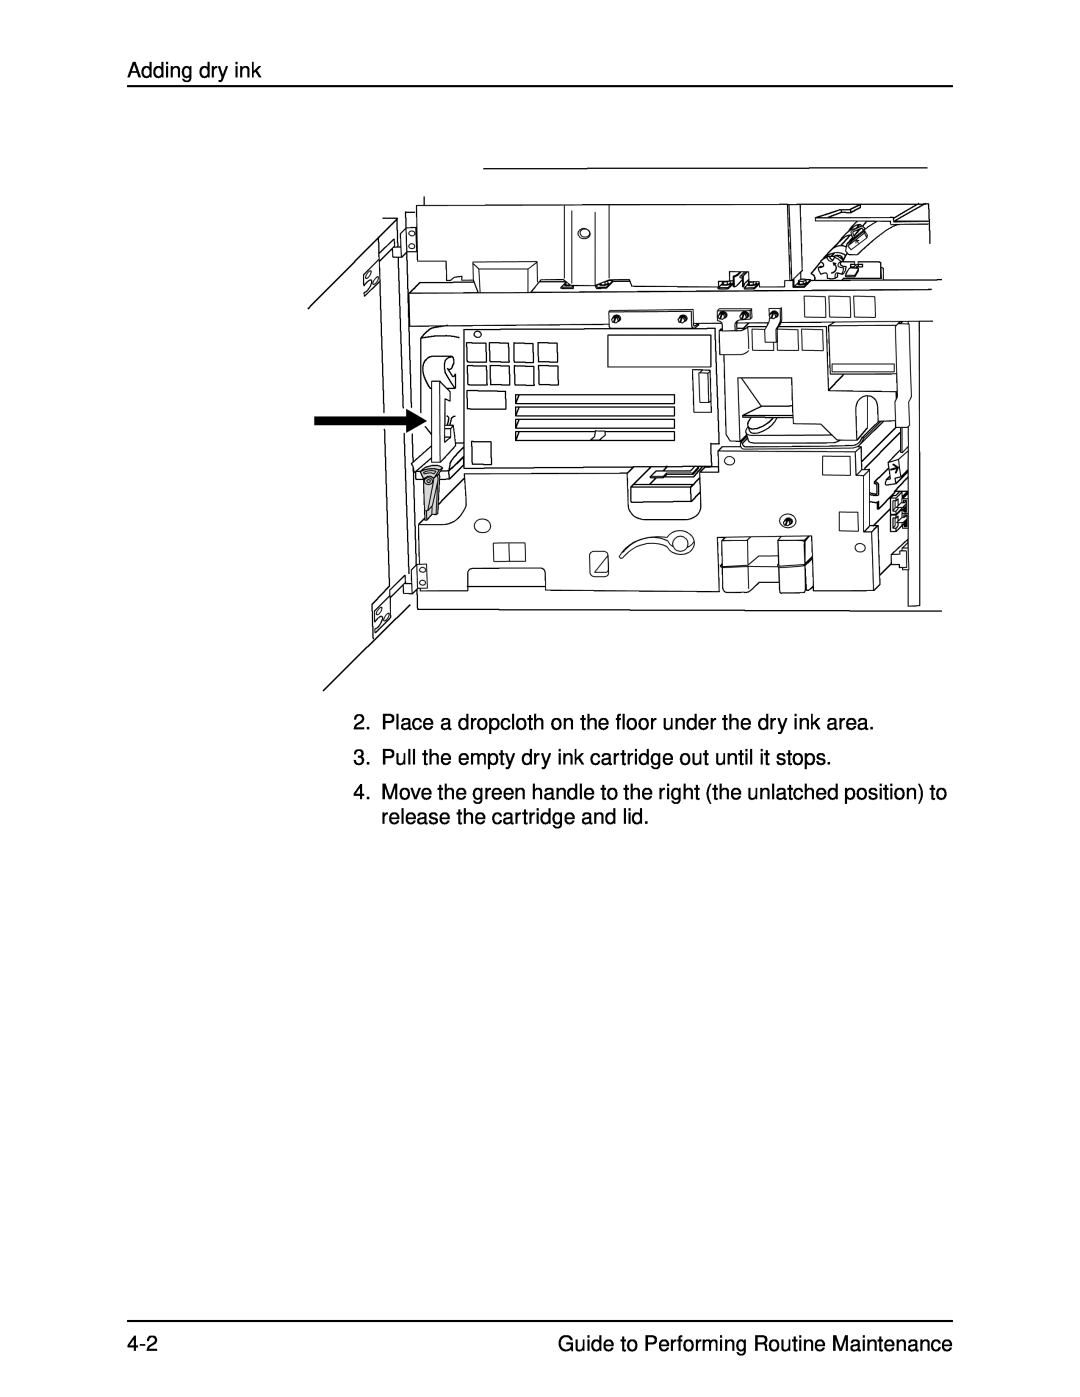 Xerox DocuPrint 96 manual Adding dry ink, Place a dropcloth on the floor under the dry ink area 